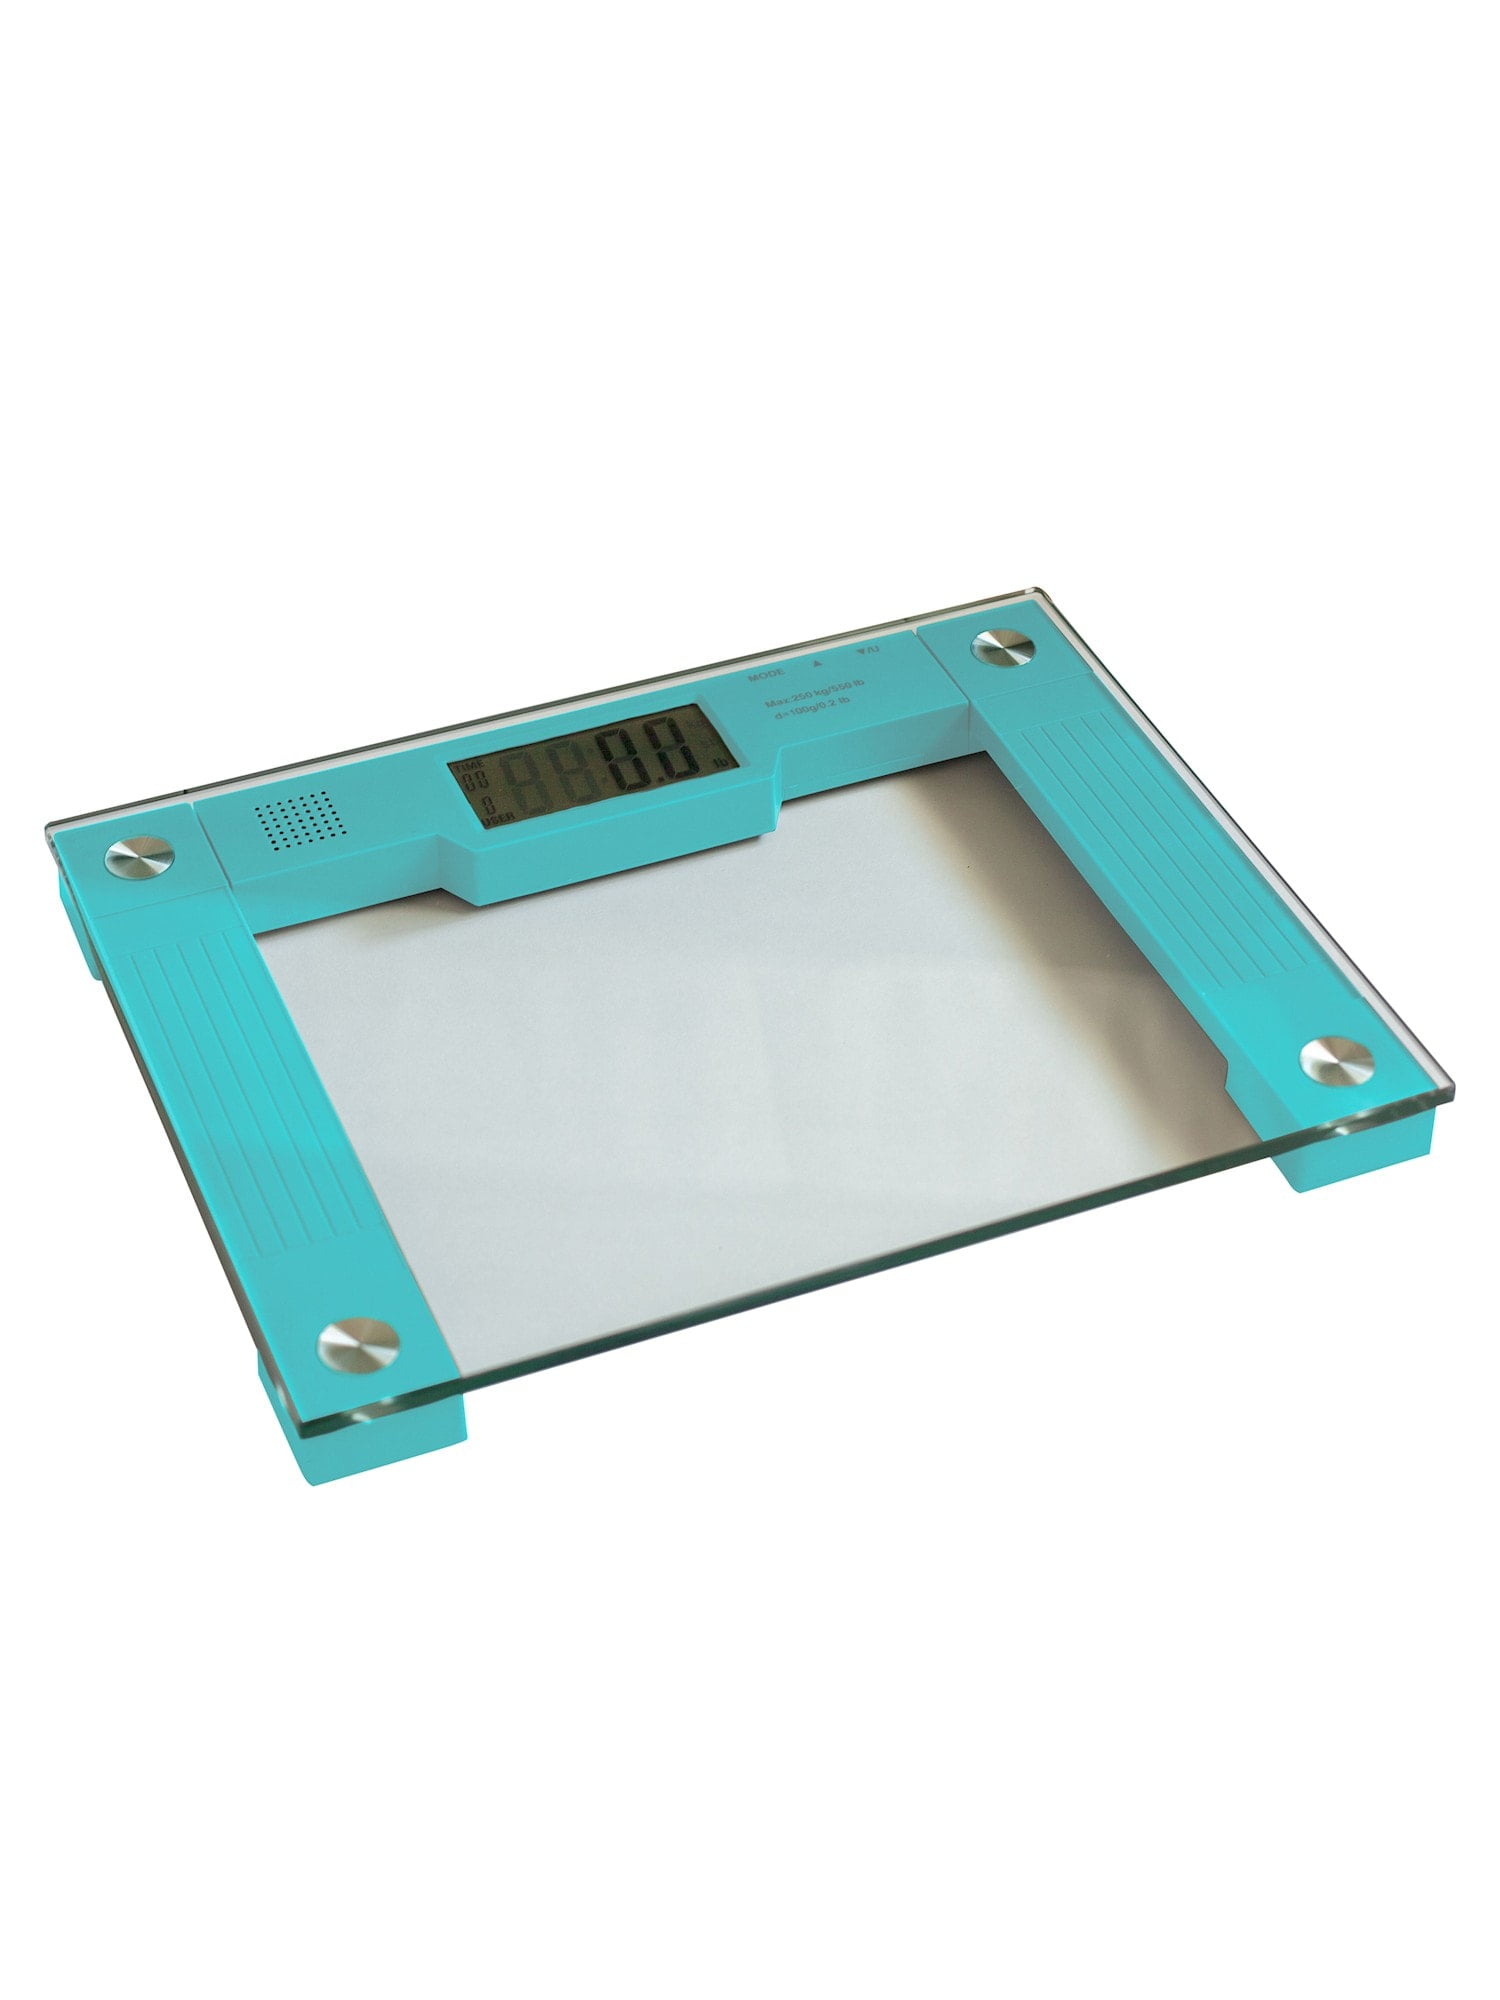 Jobar® Extendable Large Display Weight Scale - Accessibility